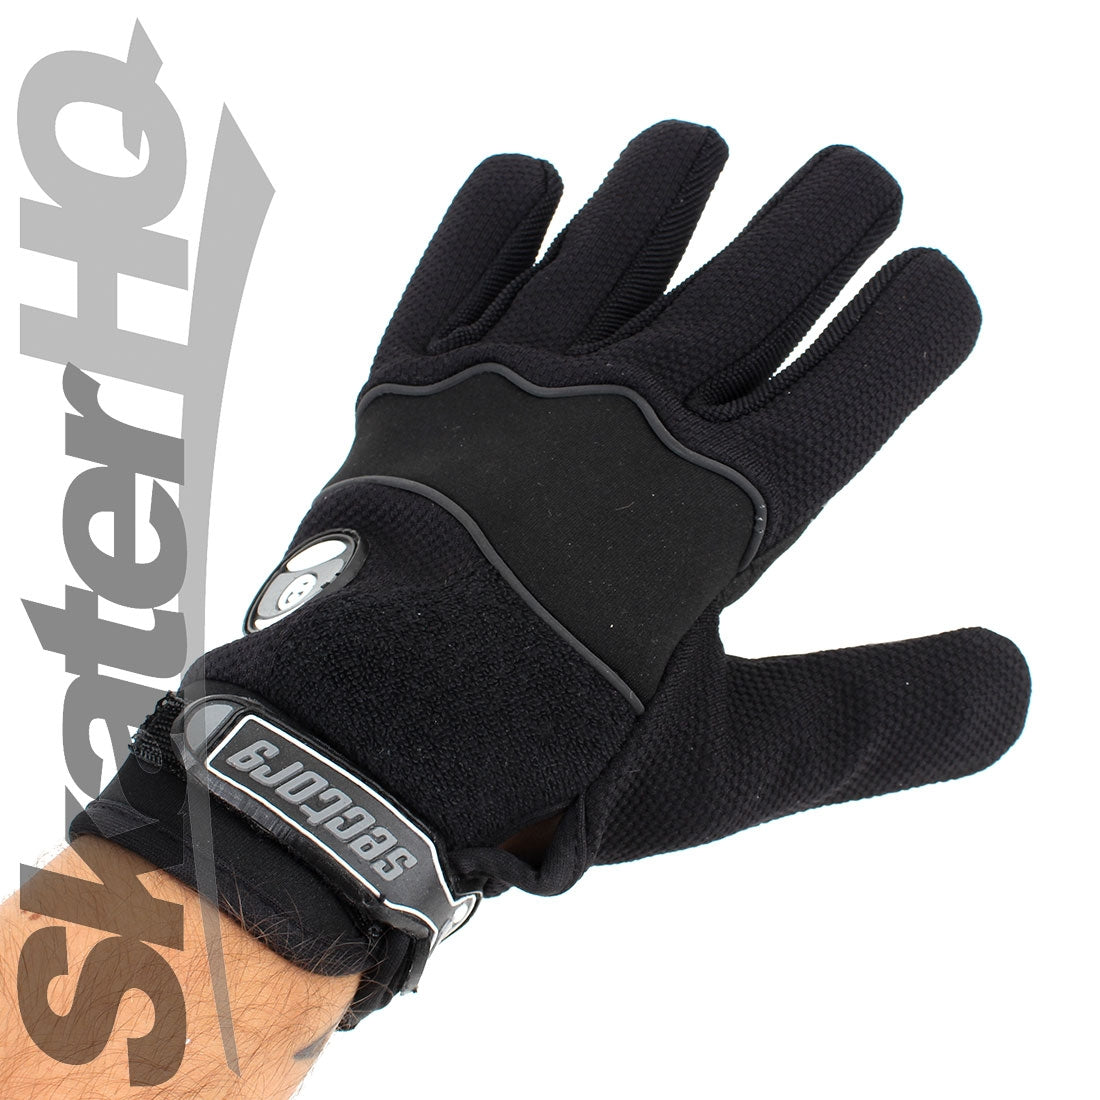 Sector 9 Apex Stealth Glove - S/M Protective Gear